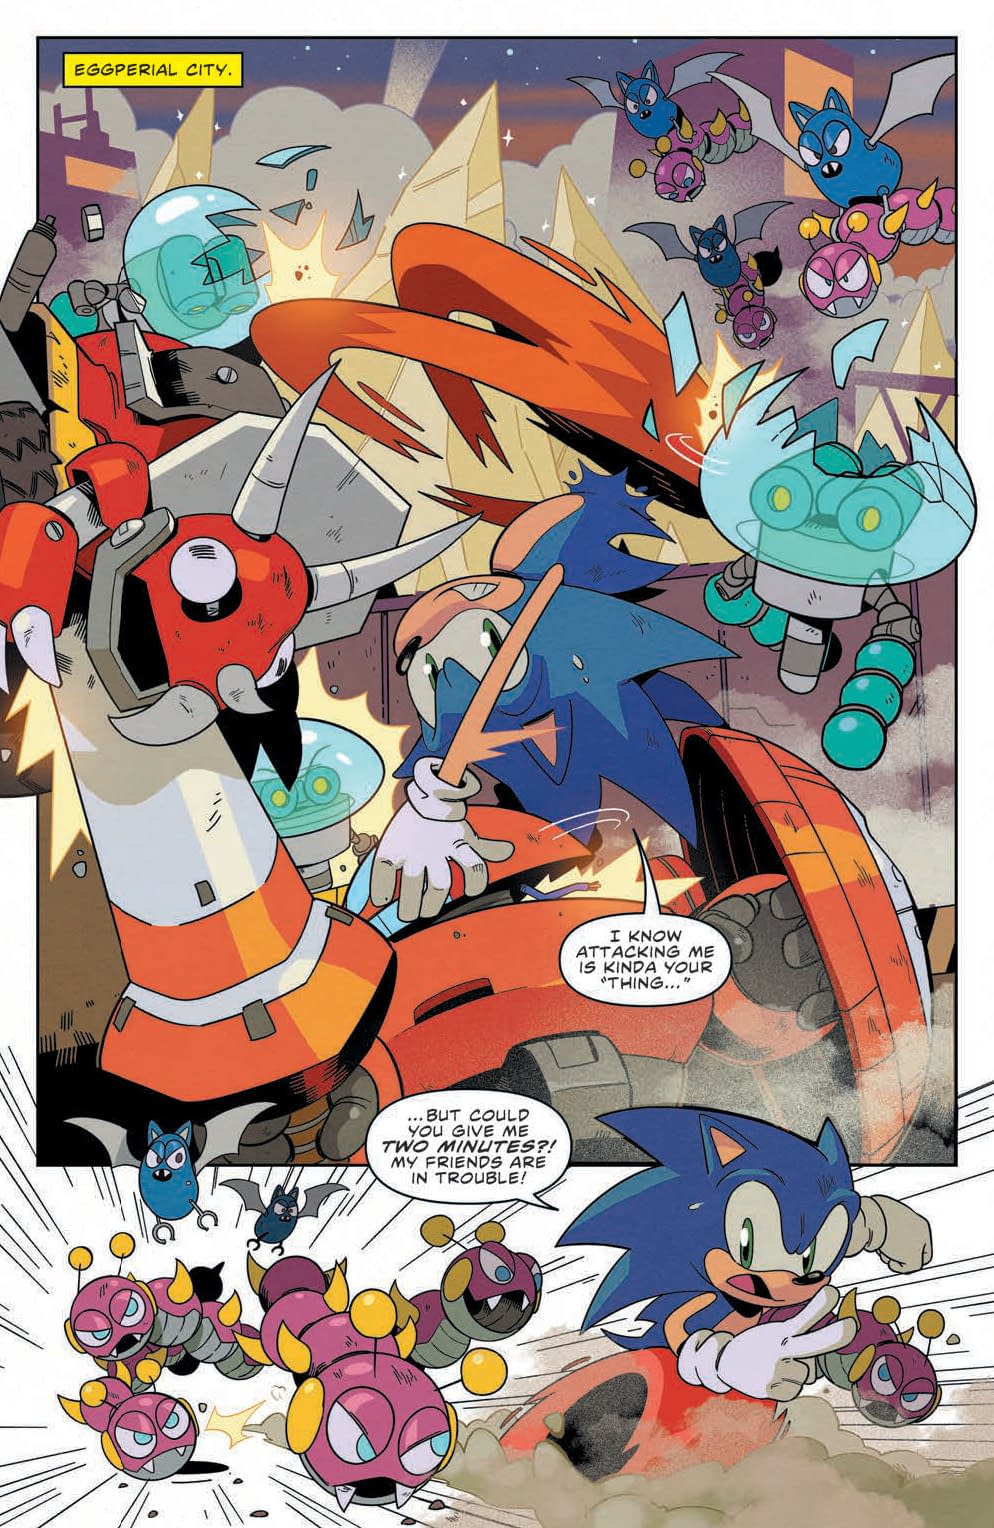 Interior preview page from Sonic the Hedgehog #58